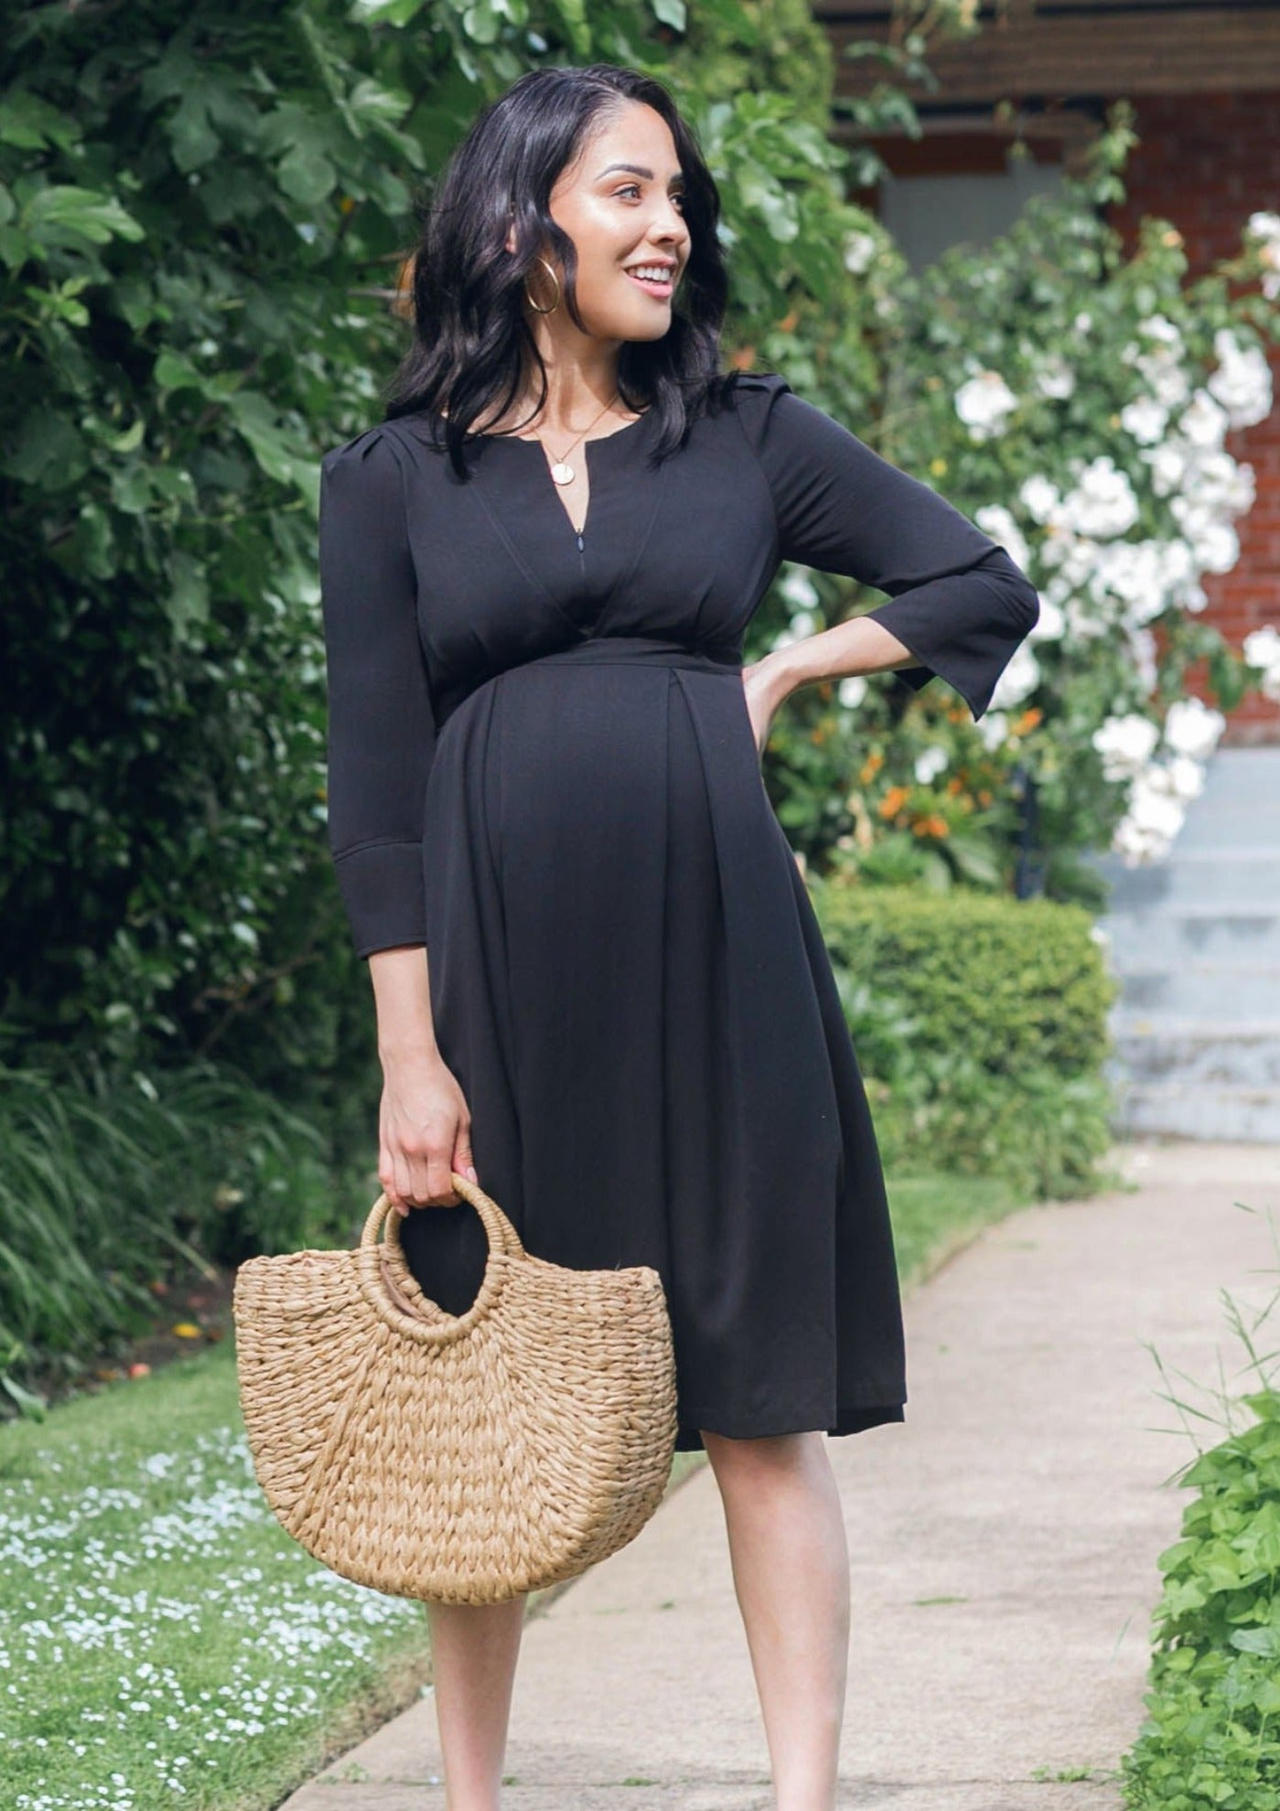 Shop the Best Petite Maternity Clothes for Petite by marionmaternity on  DeviantArt